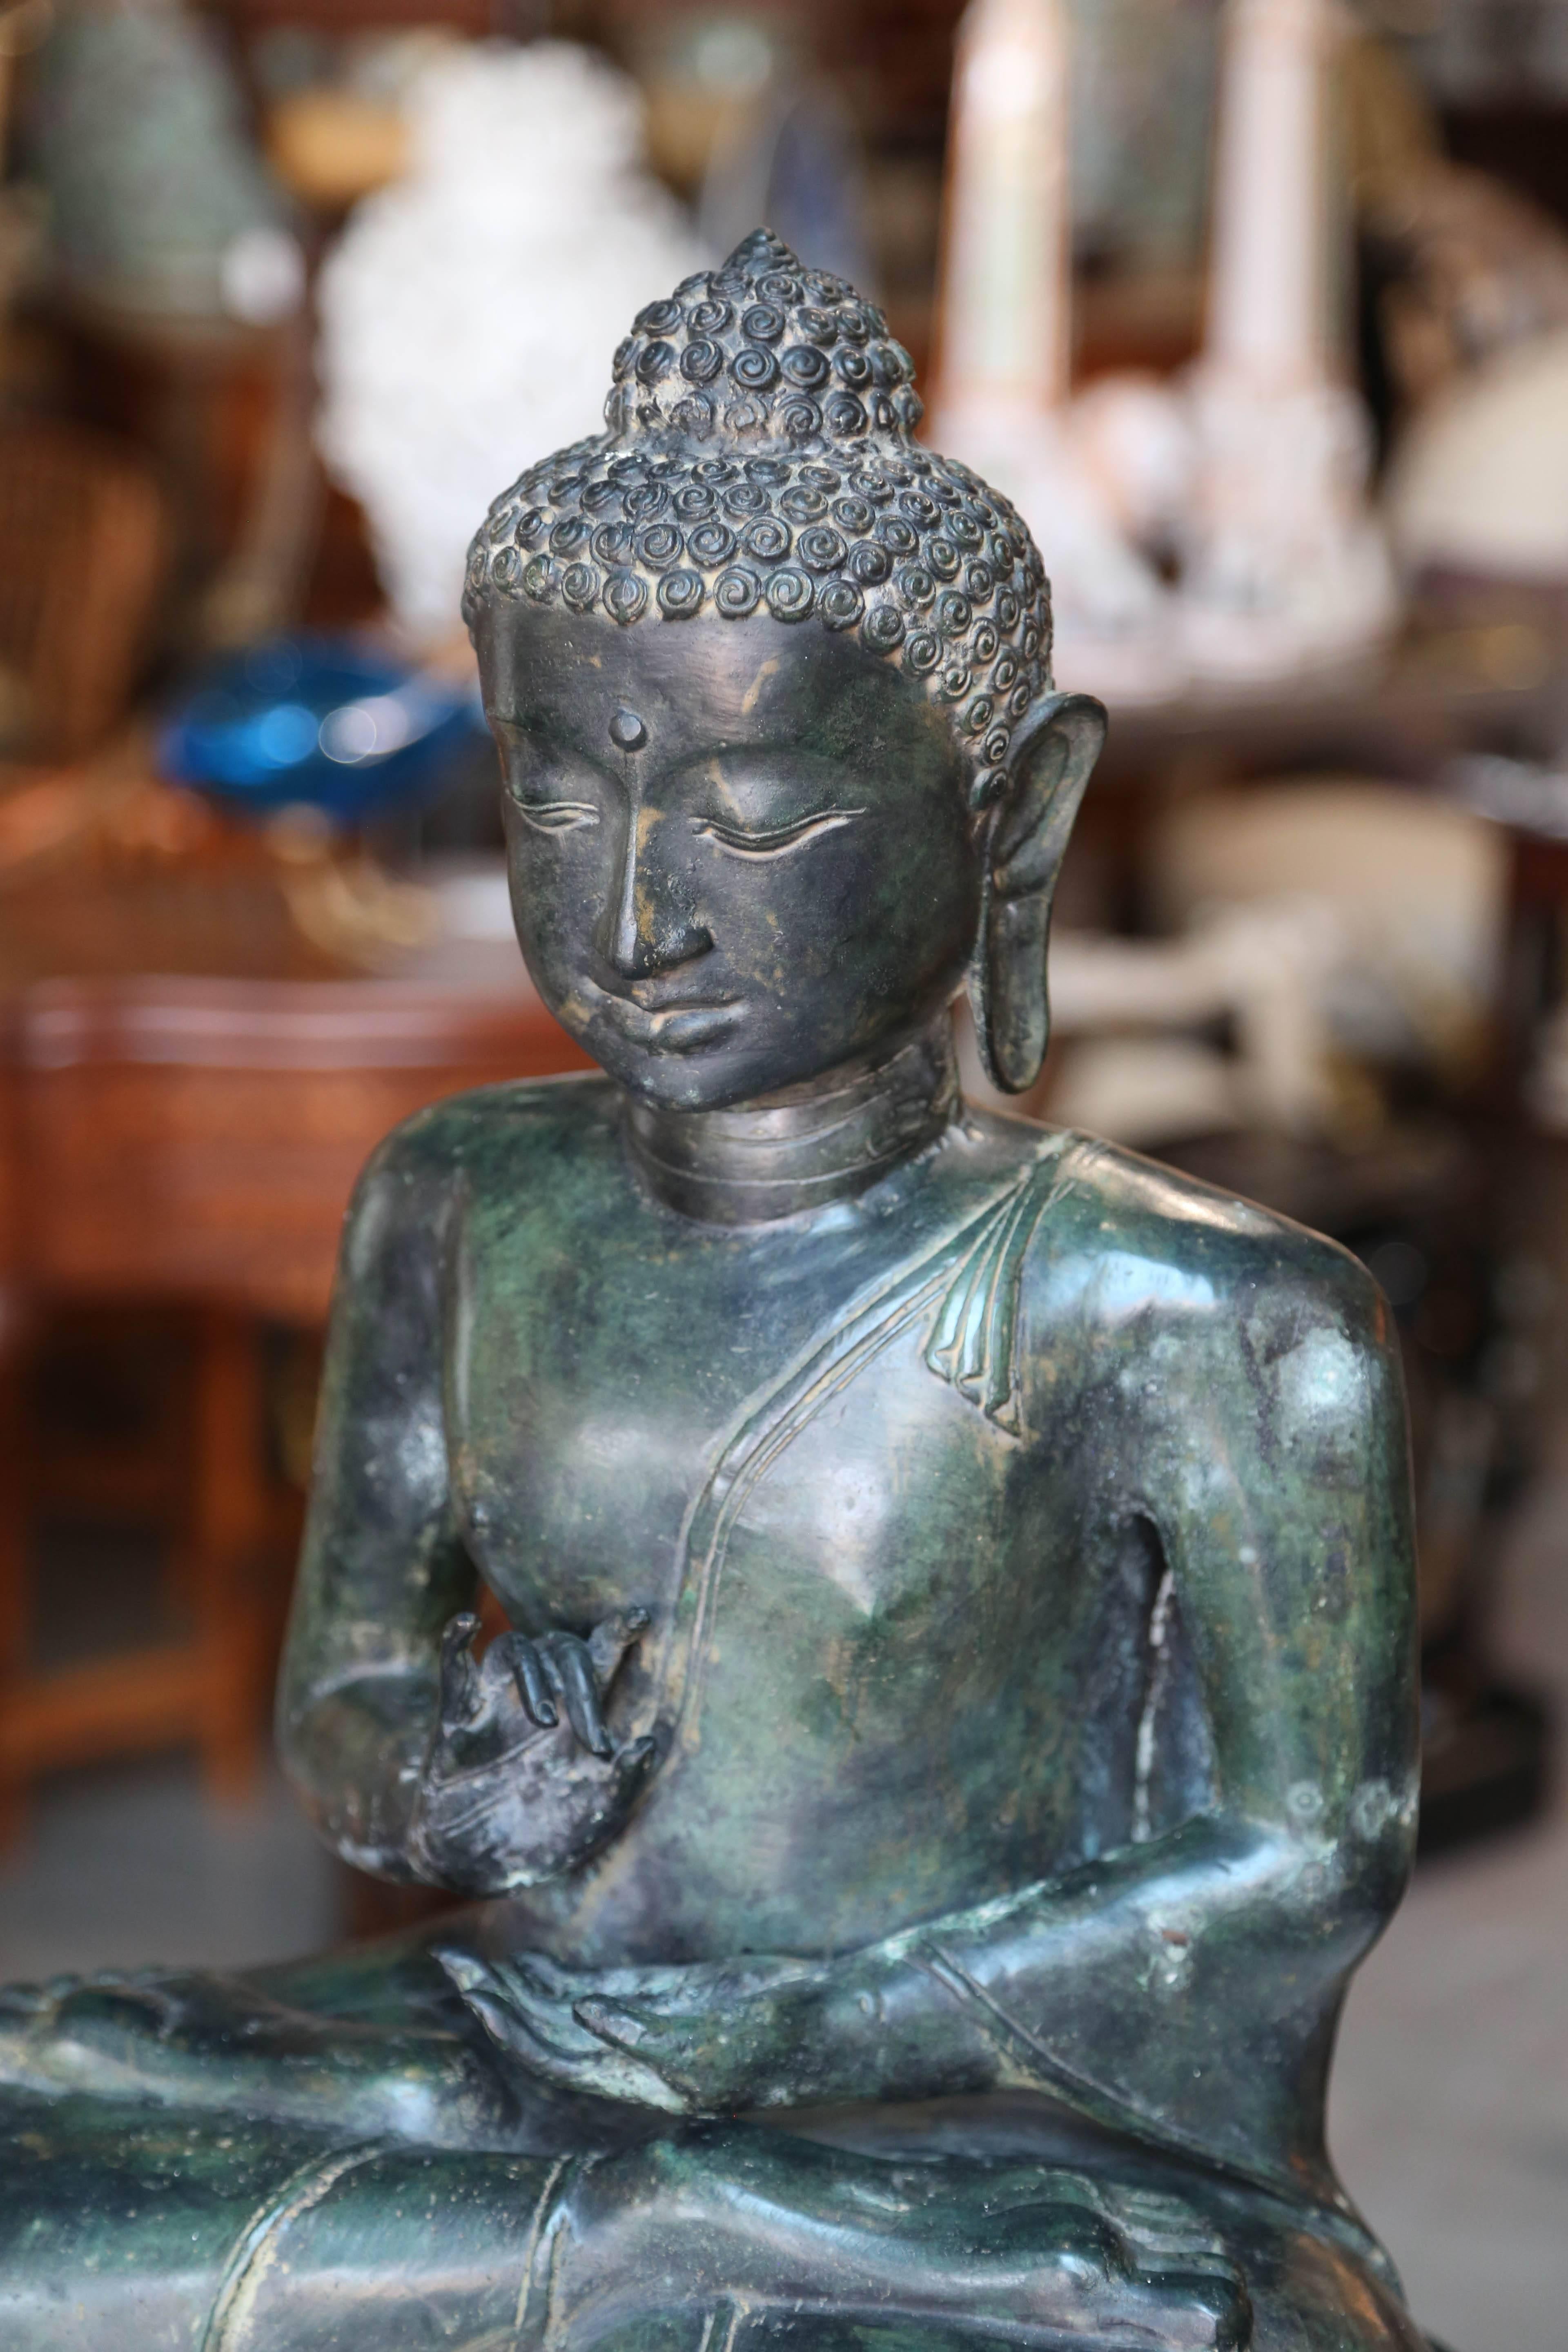 Chinese Antique Bronze or Copper Figure of Buddha